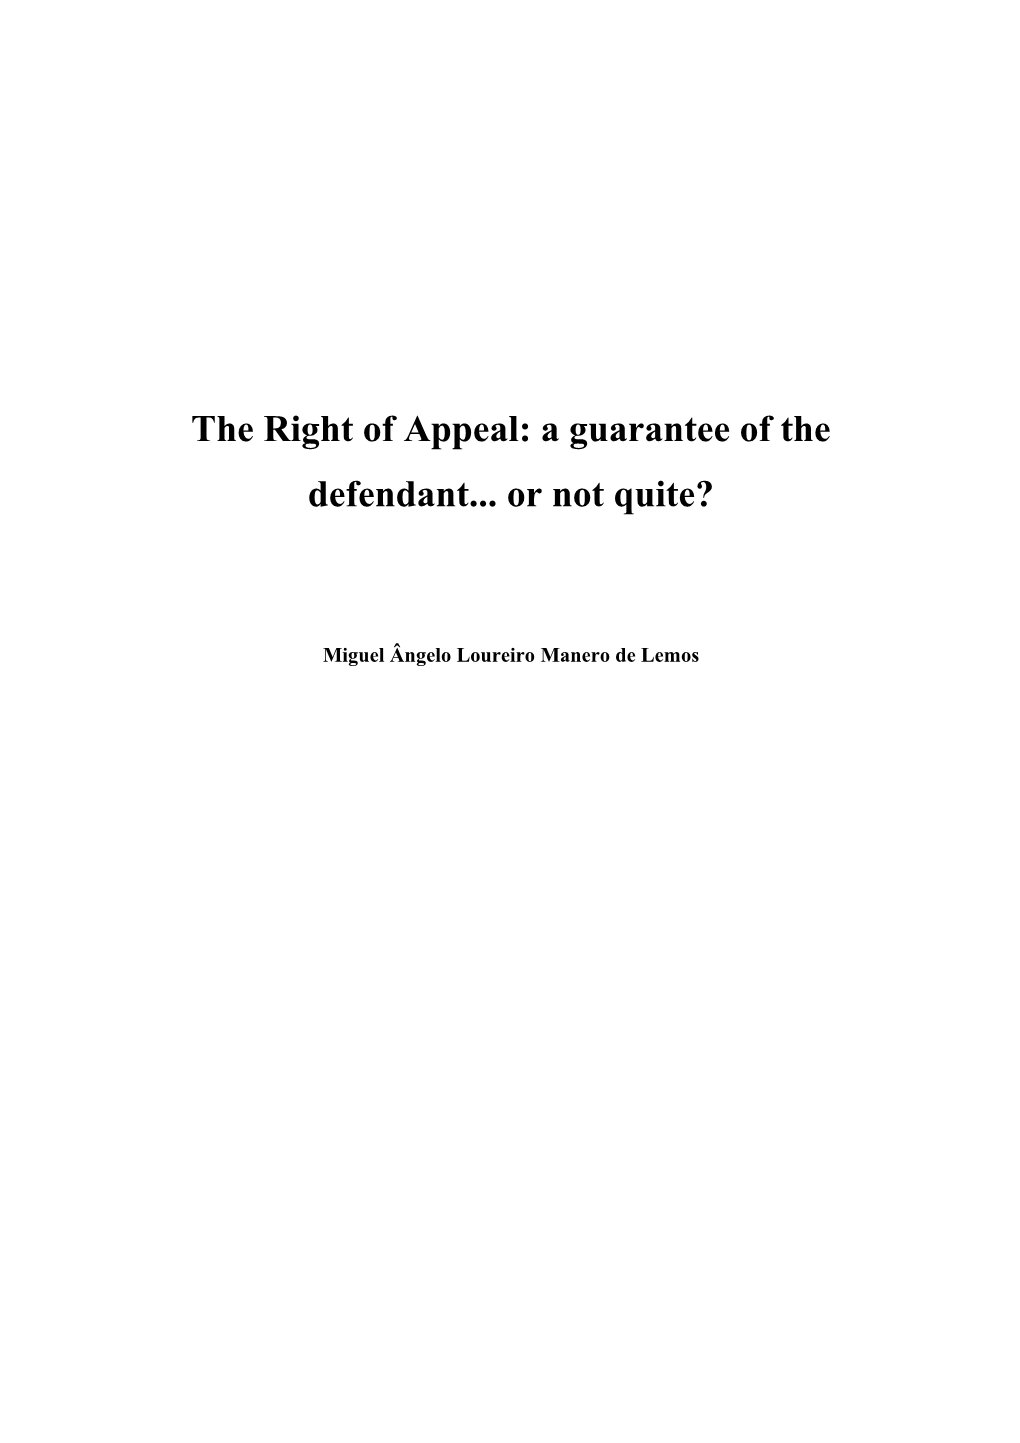 An Appeal Is the Act Or Fact of Challenging a Judicially Cognizable and Binding Judgment